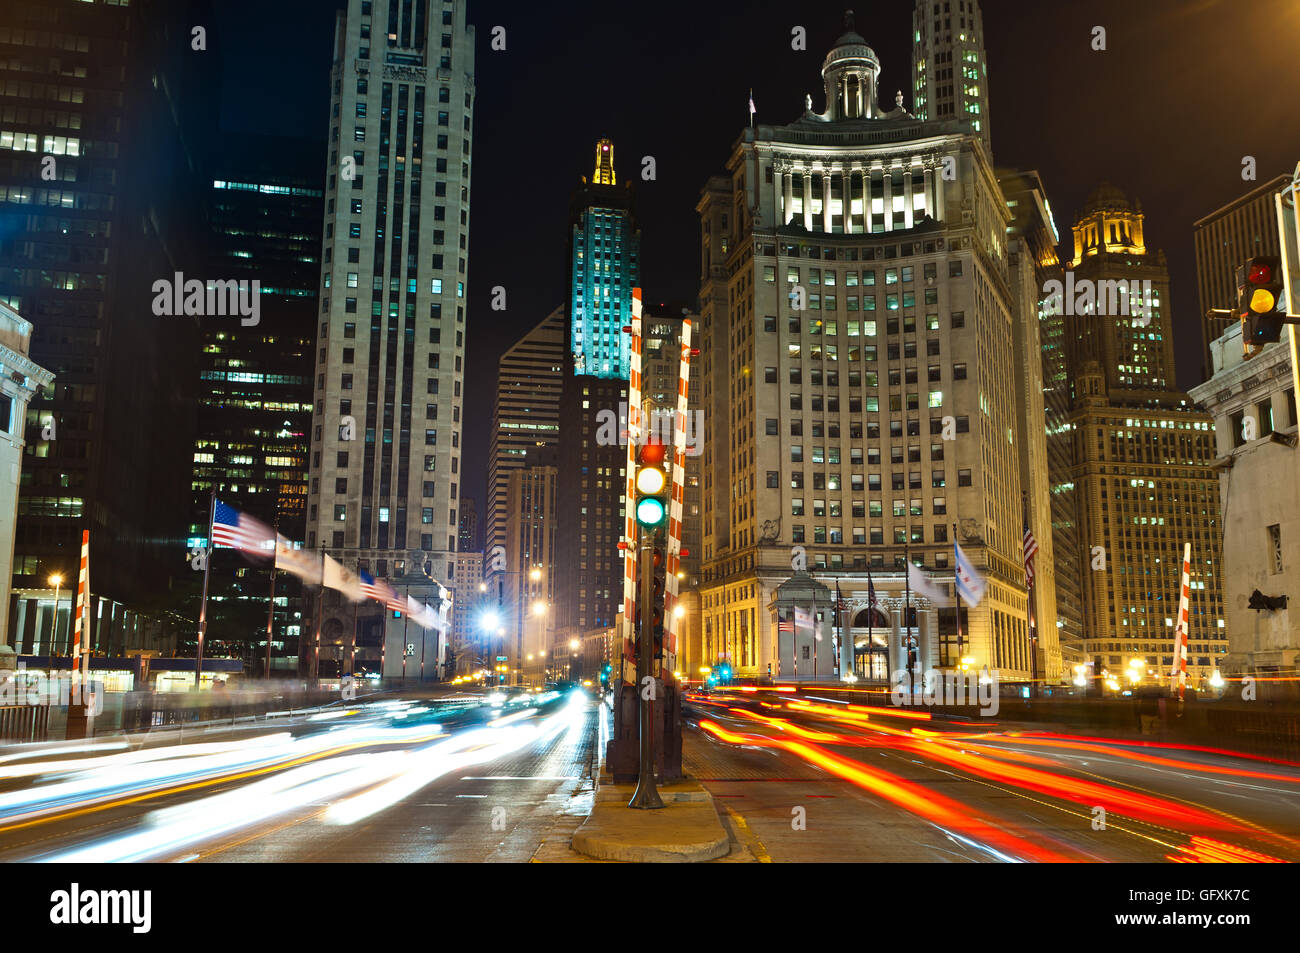 Michigan Avenue in Chicago. Image of busy traffic at Chicago night street. Stock Photo